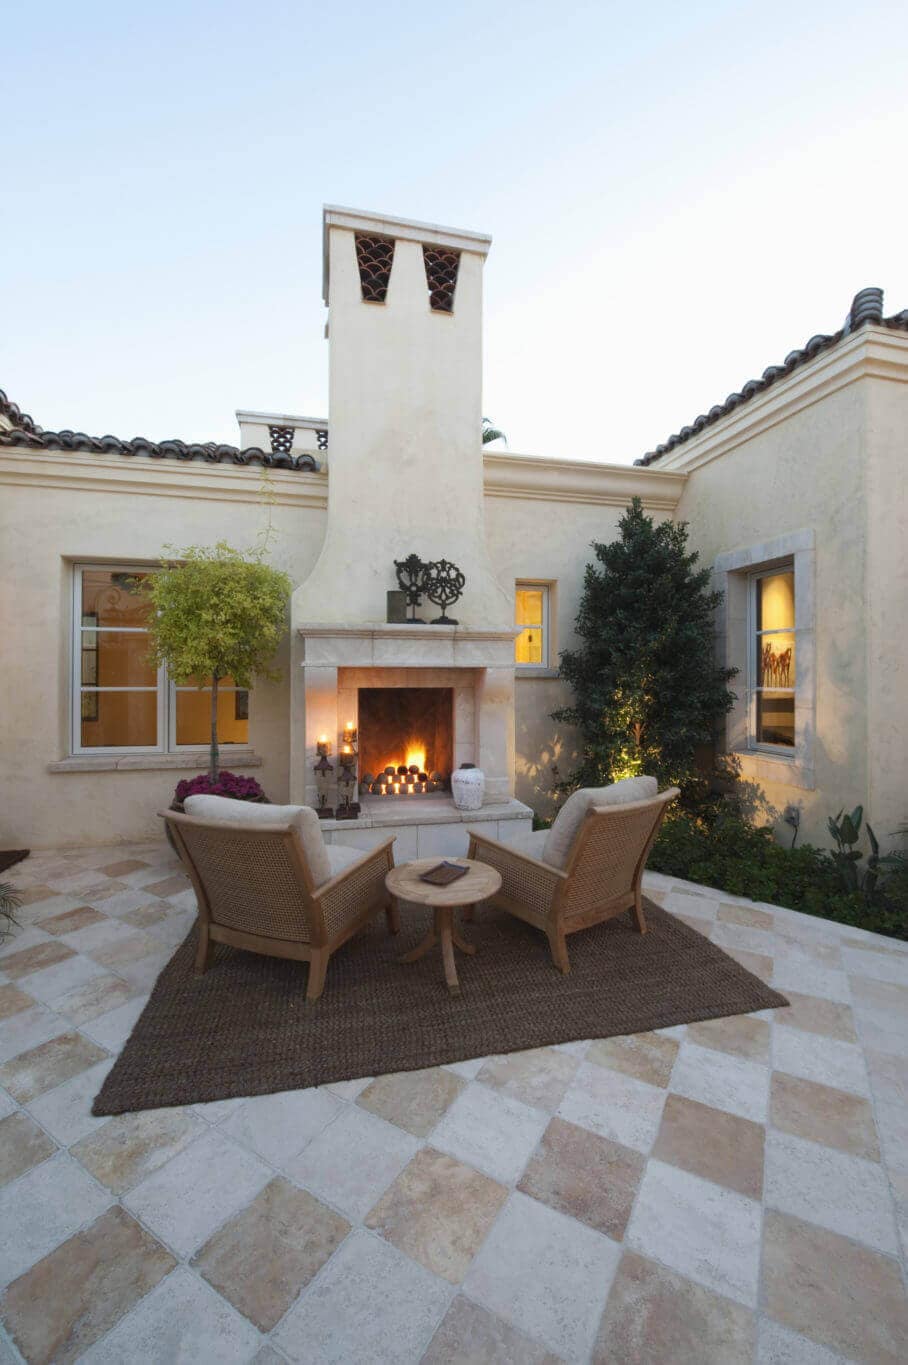 Checkerboard quarry tile flooring for outdoor space with a fireplace